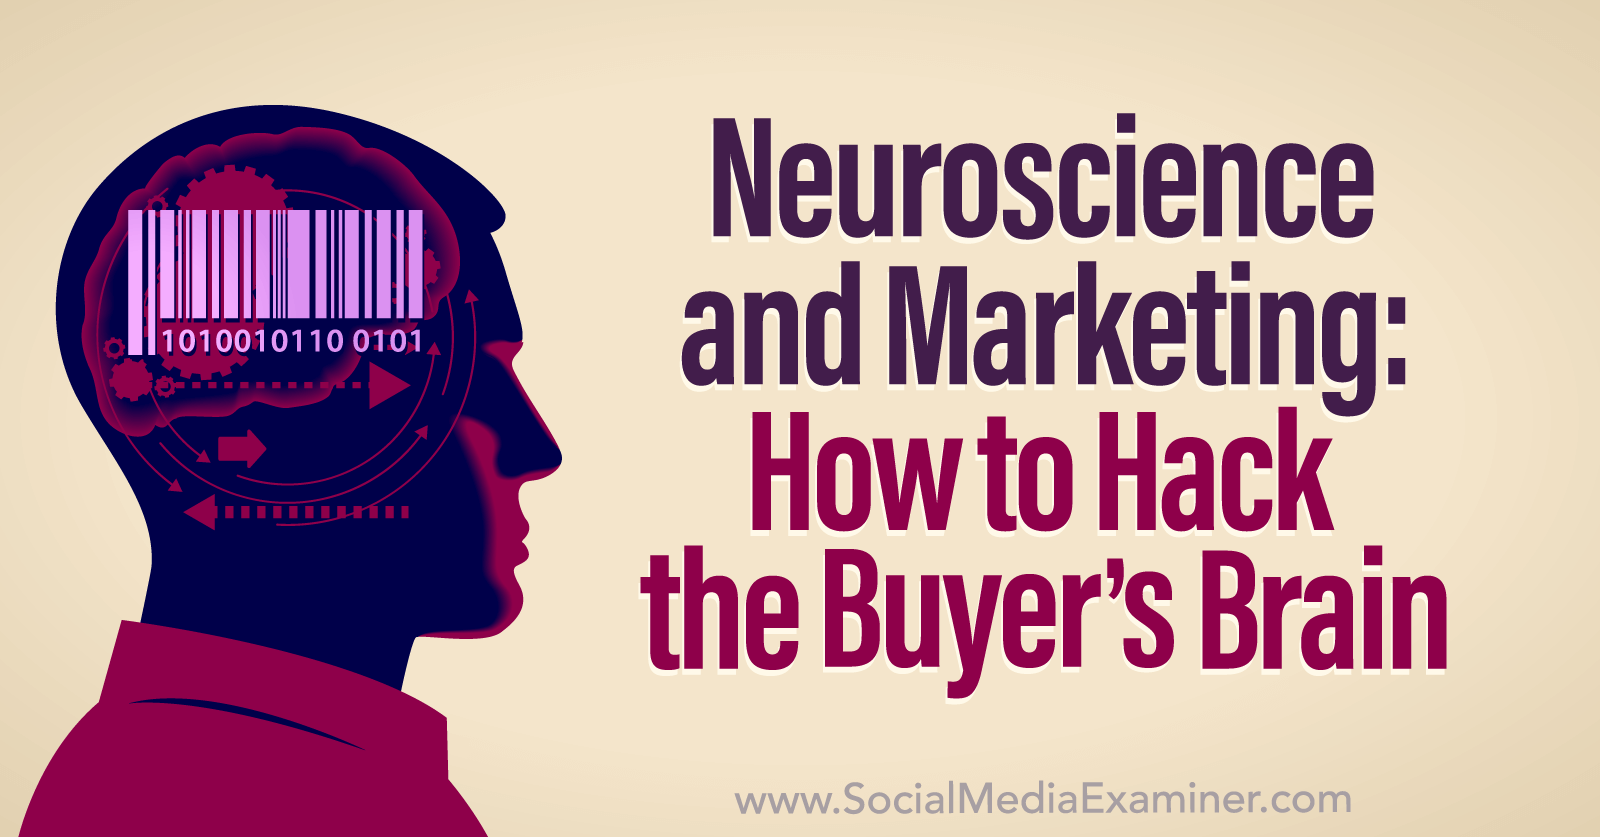 Neuroscience and Marketing: How to Hack the Buyer’s Brain by Social Media Examiner